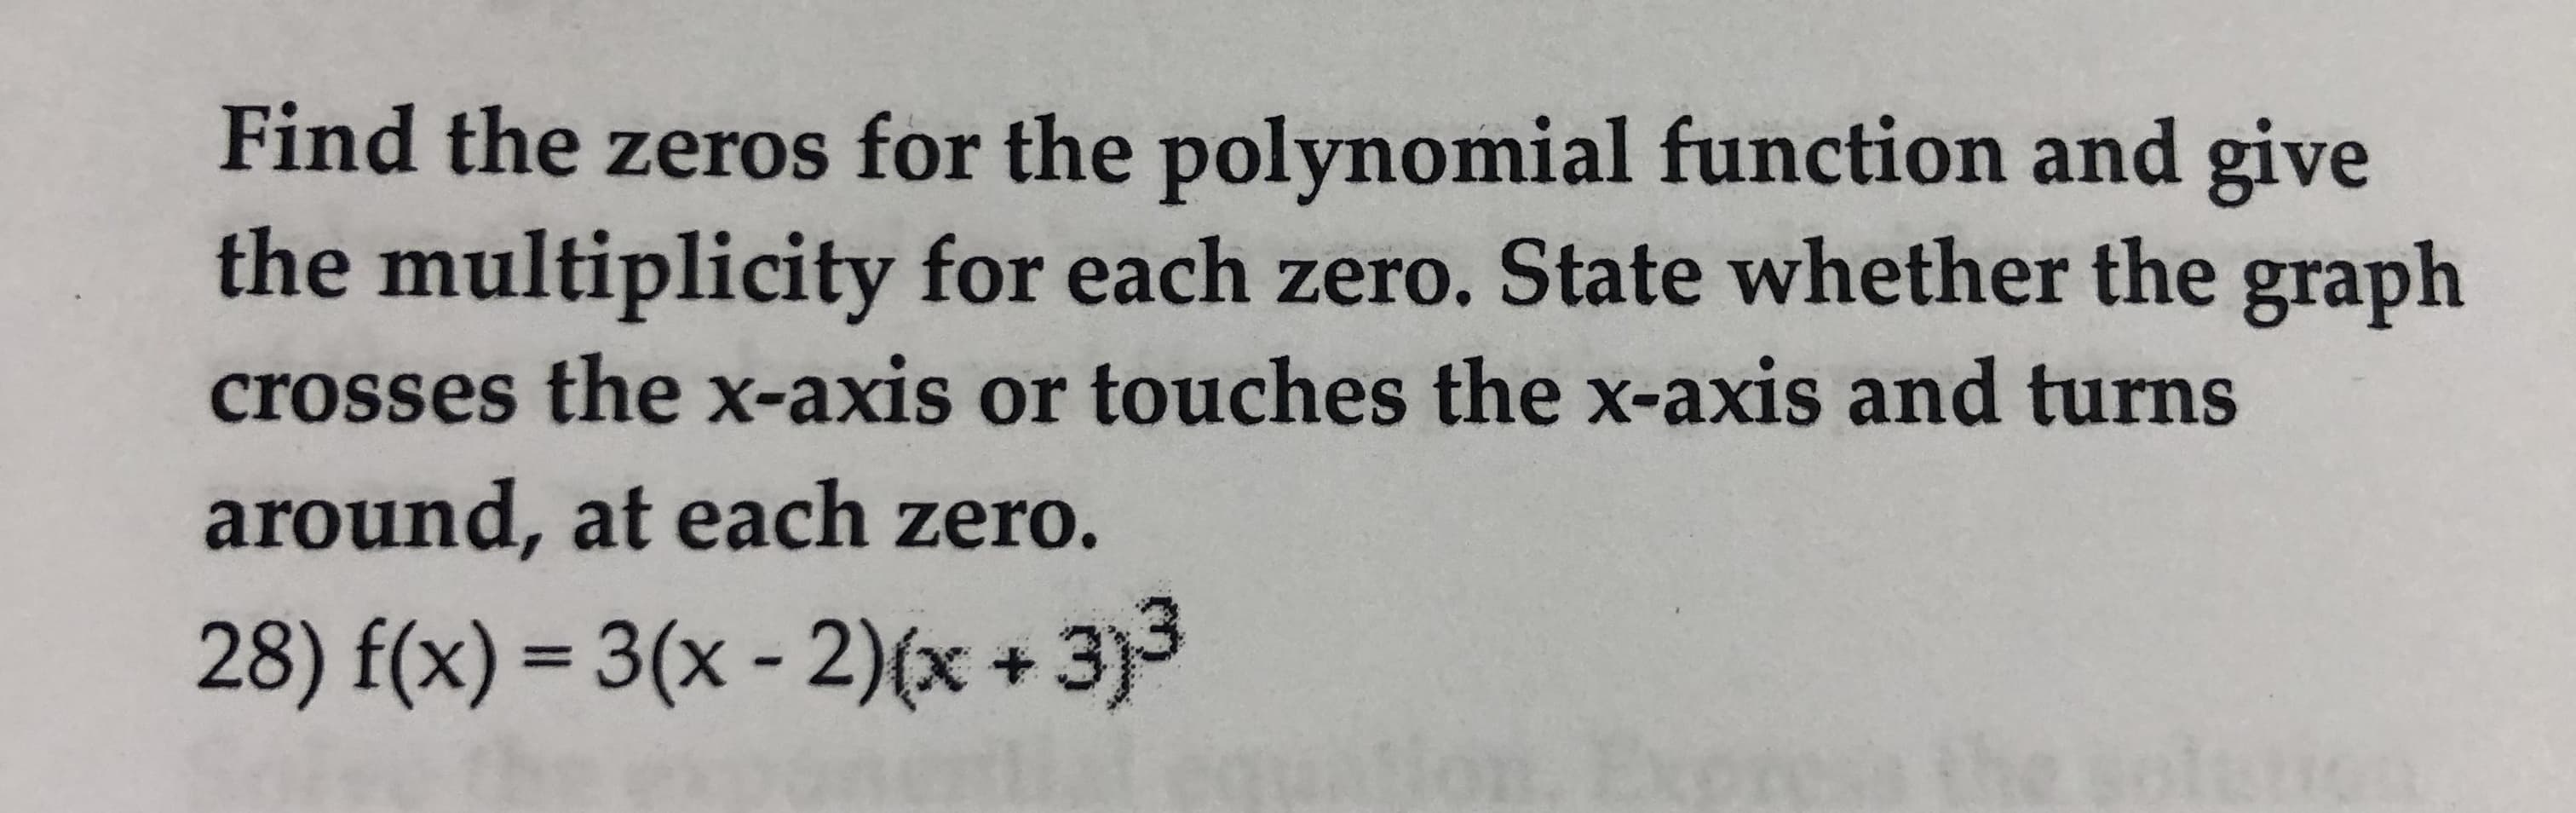 Find the zeros for the polynomial function and give
the multiplicity for each zero. State whether the graph
crosses the x-axis or touches the x-axis and turns
around, at each zero.
28) f(x) 3(x-2)x+3)3
